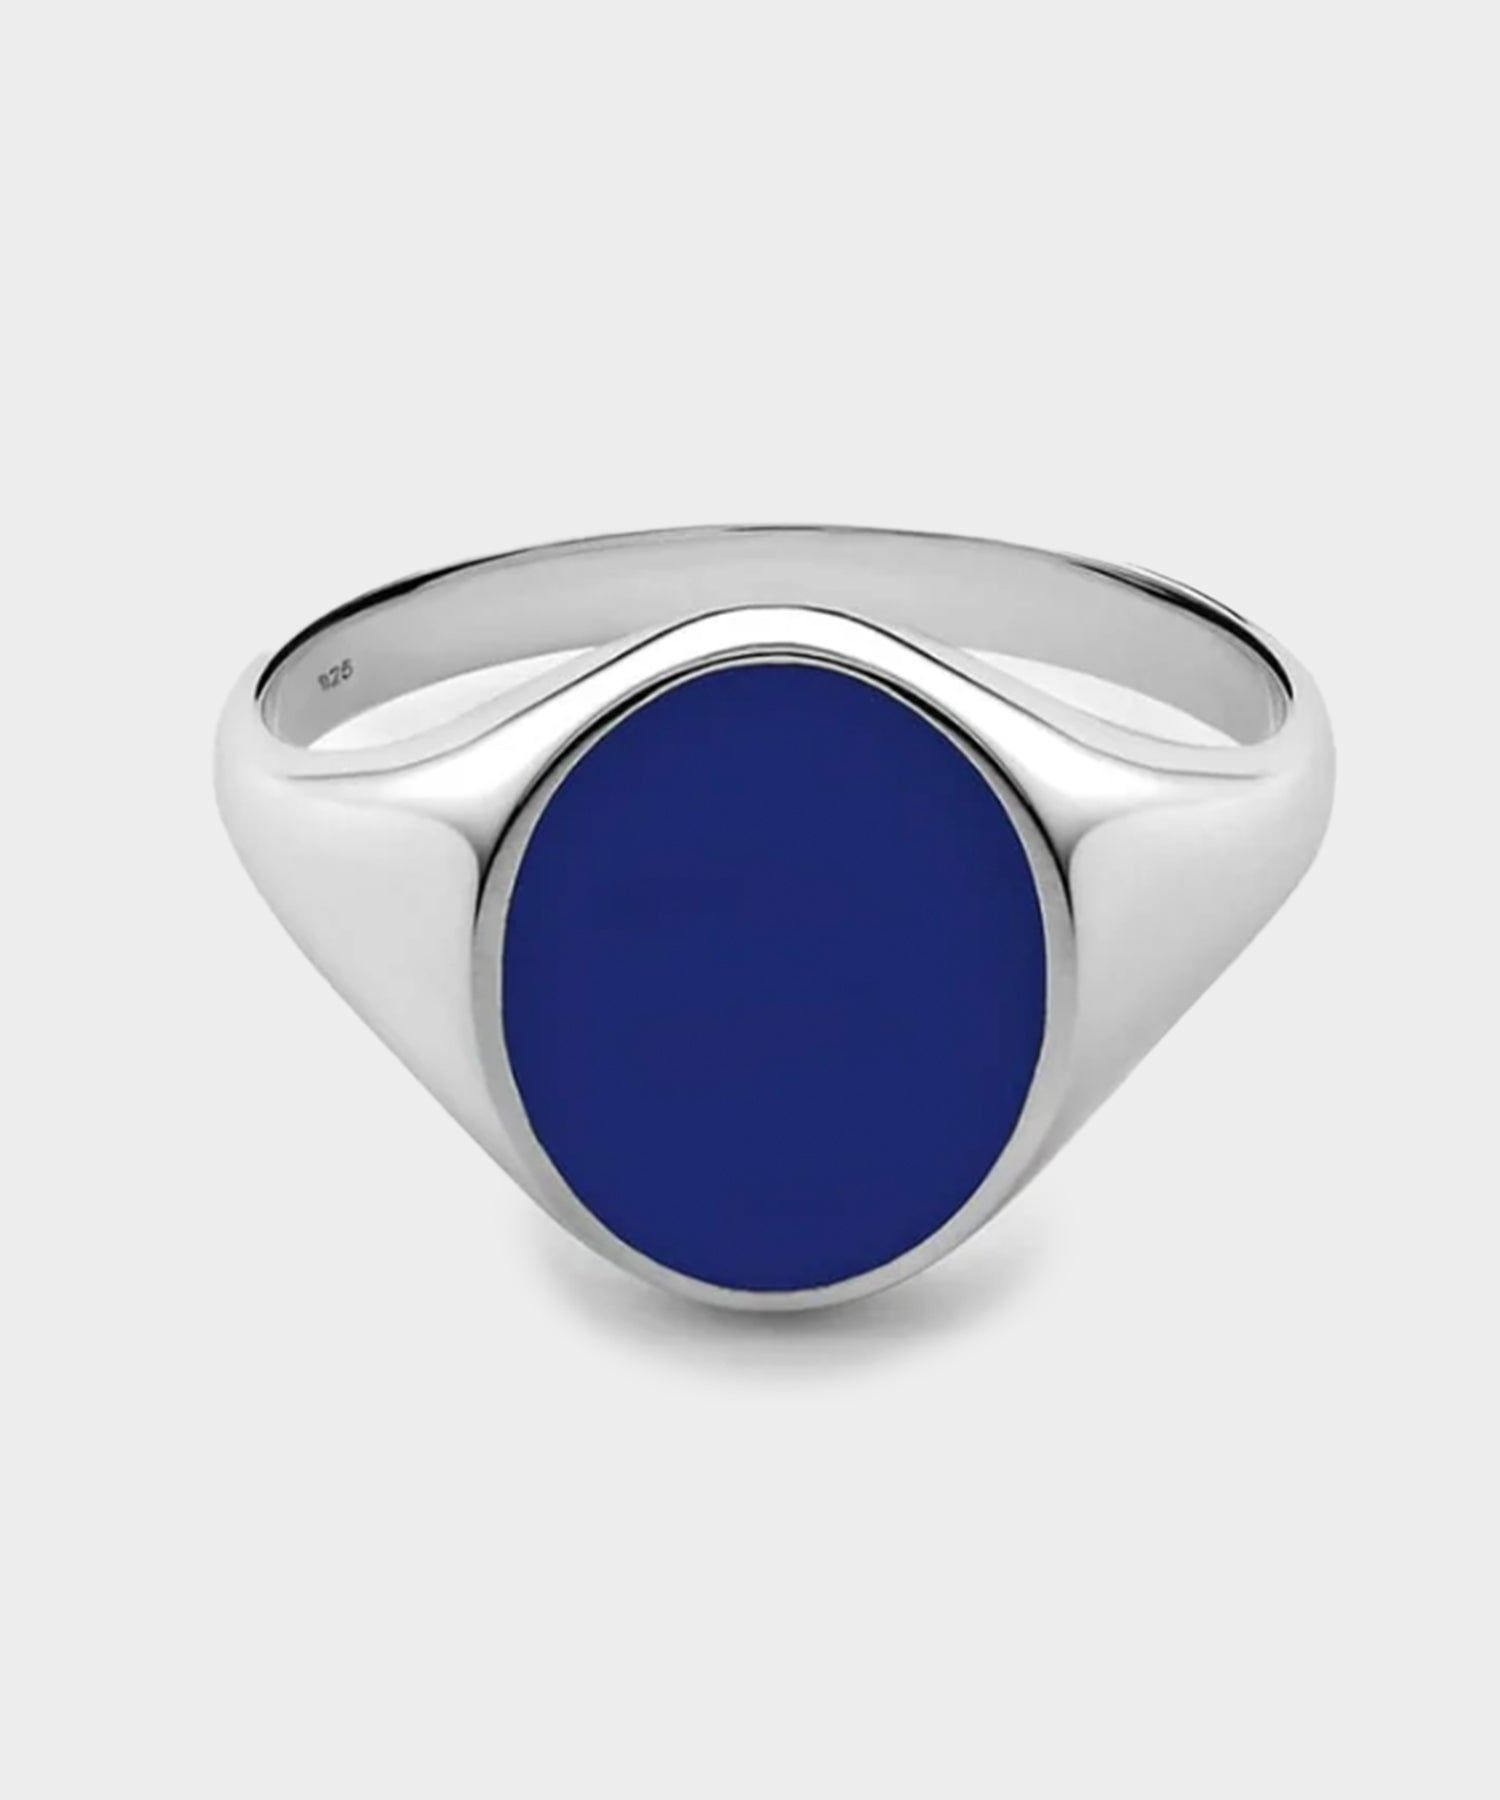 Heritage Ring with Enamel, Sterling Silver